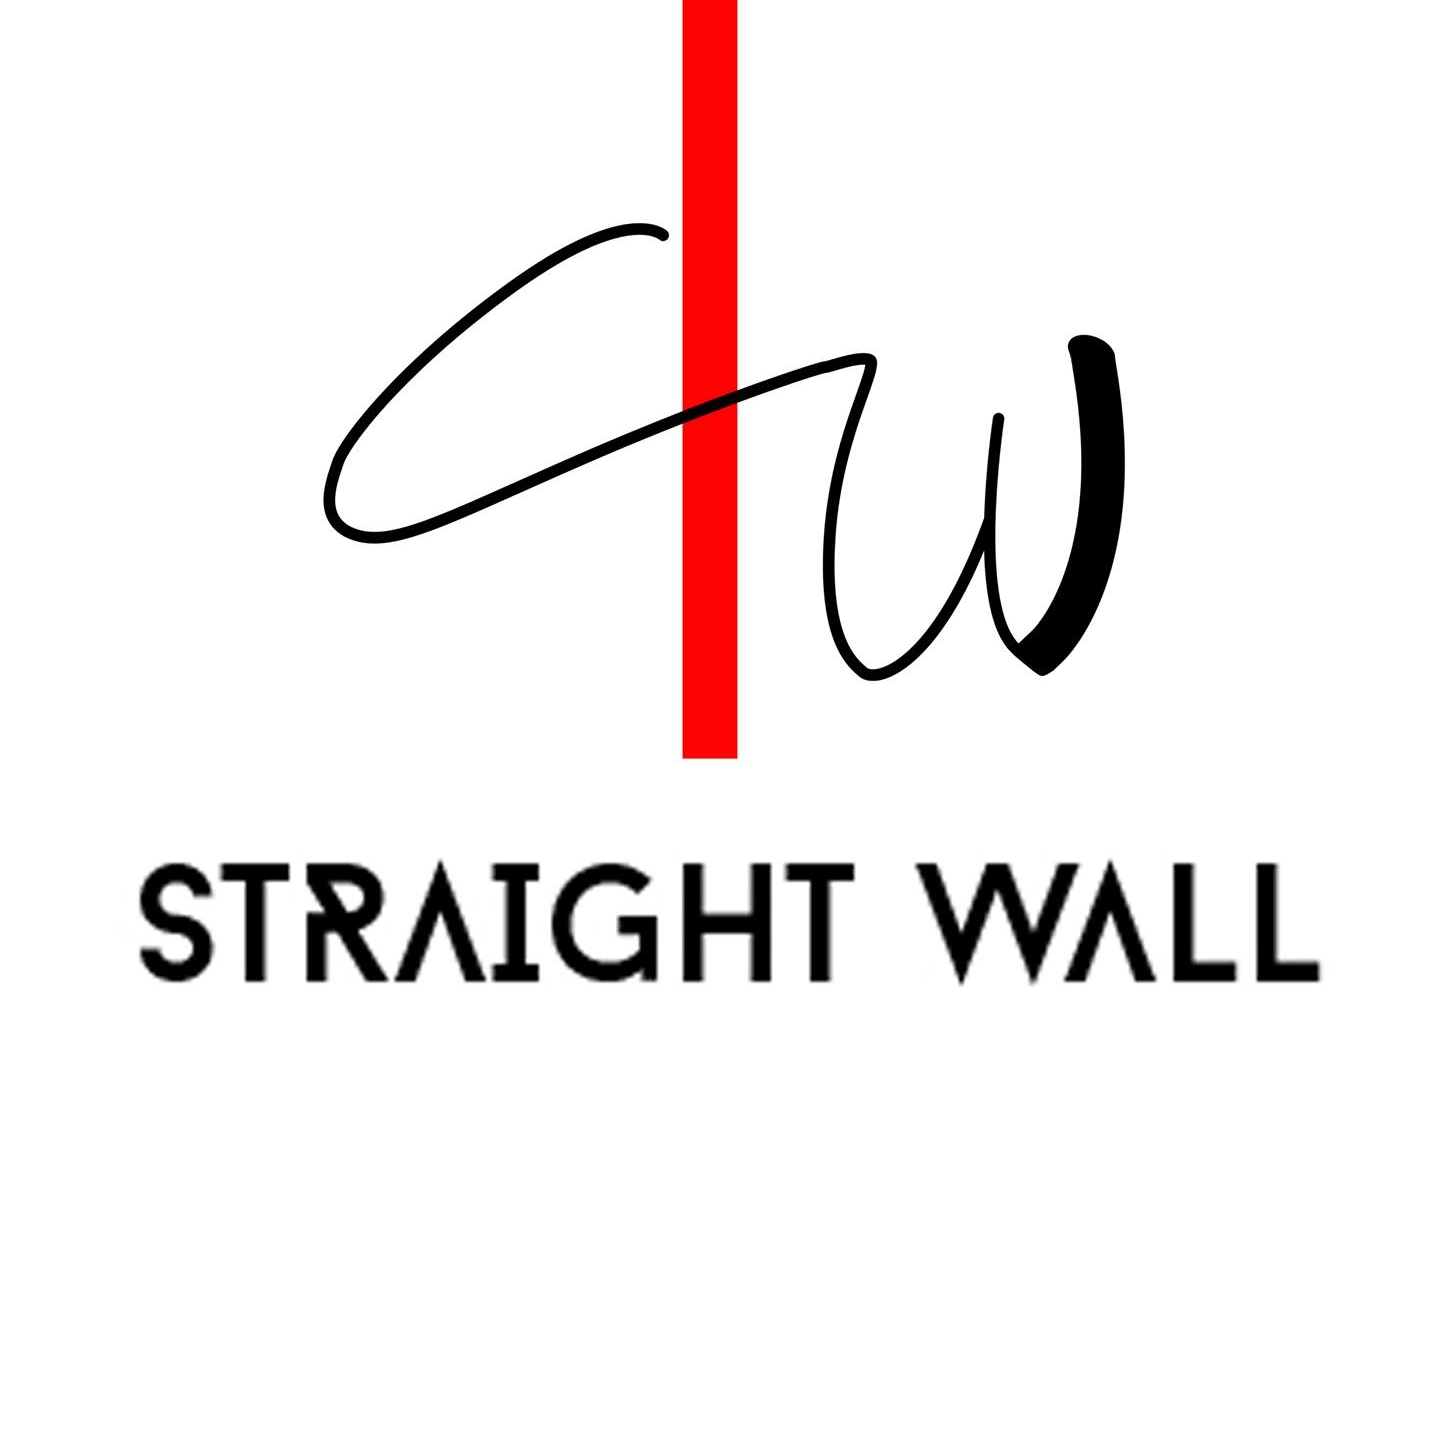 Straightwall Architects|Accounting Services|Professional Services